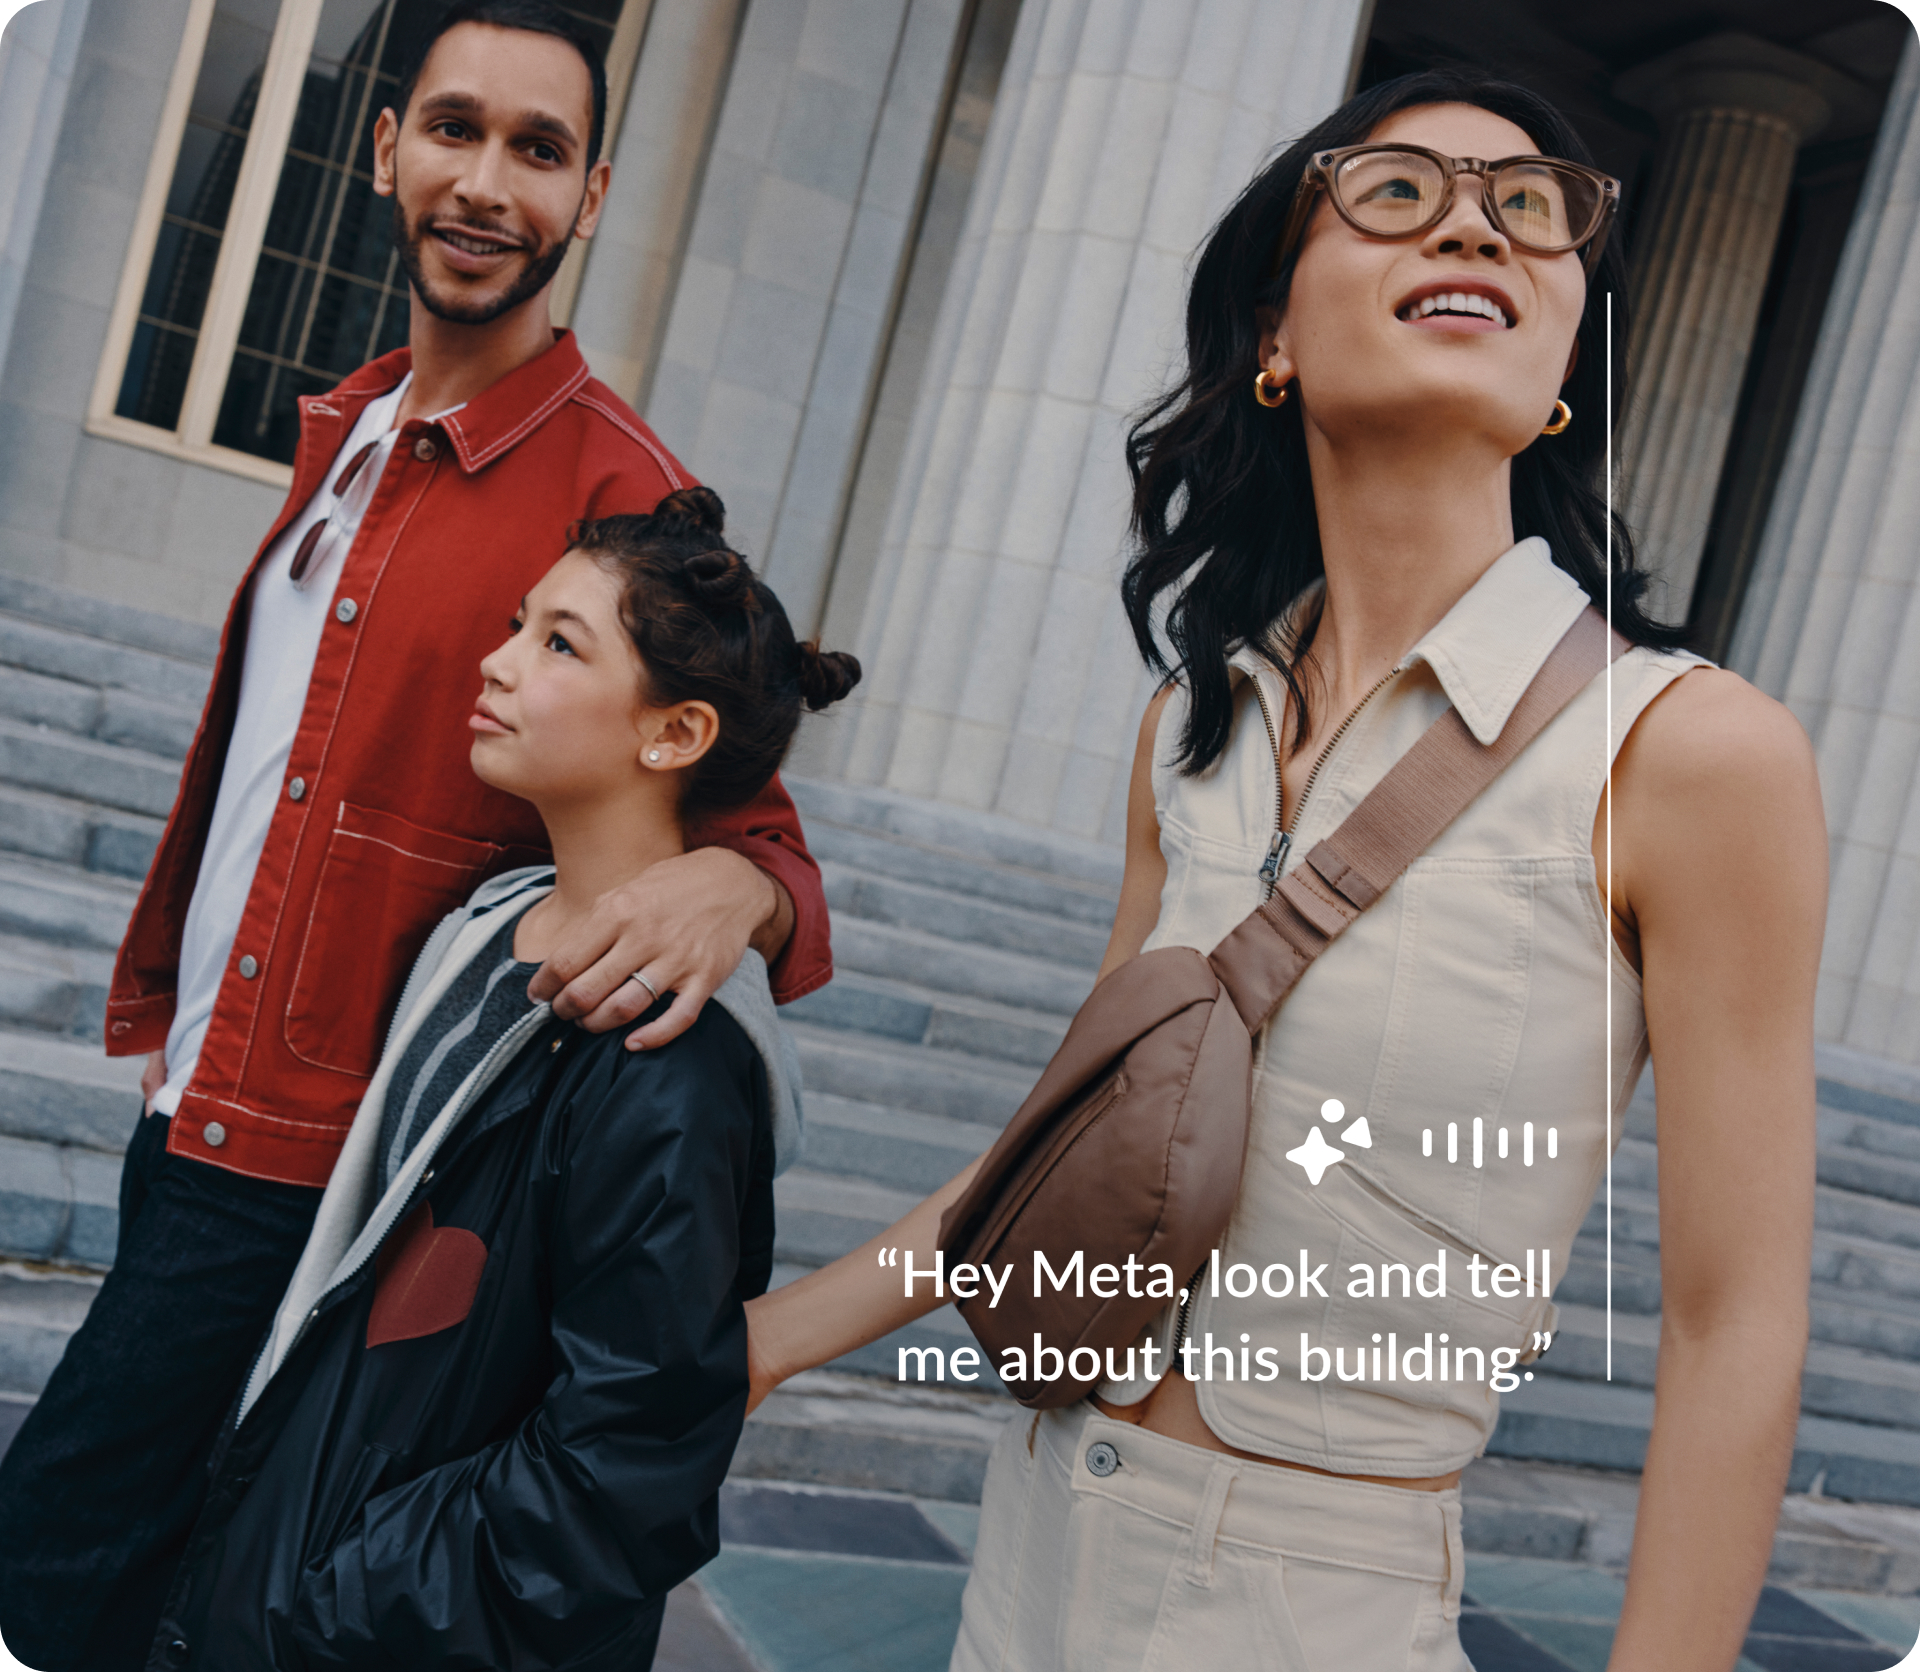 Multimodal AI for Enhanced Understanding - Meta - Ray Ban sunglasses with Artificial Intelligence <a href="https://about.fb.com/news/2024/04/new-ray-ban-meta-smart-glasses-styles-and-meta-ai-updates/" rel="nofollow">Source</a>